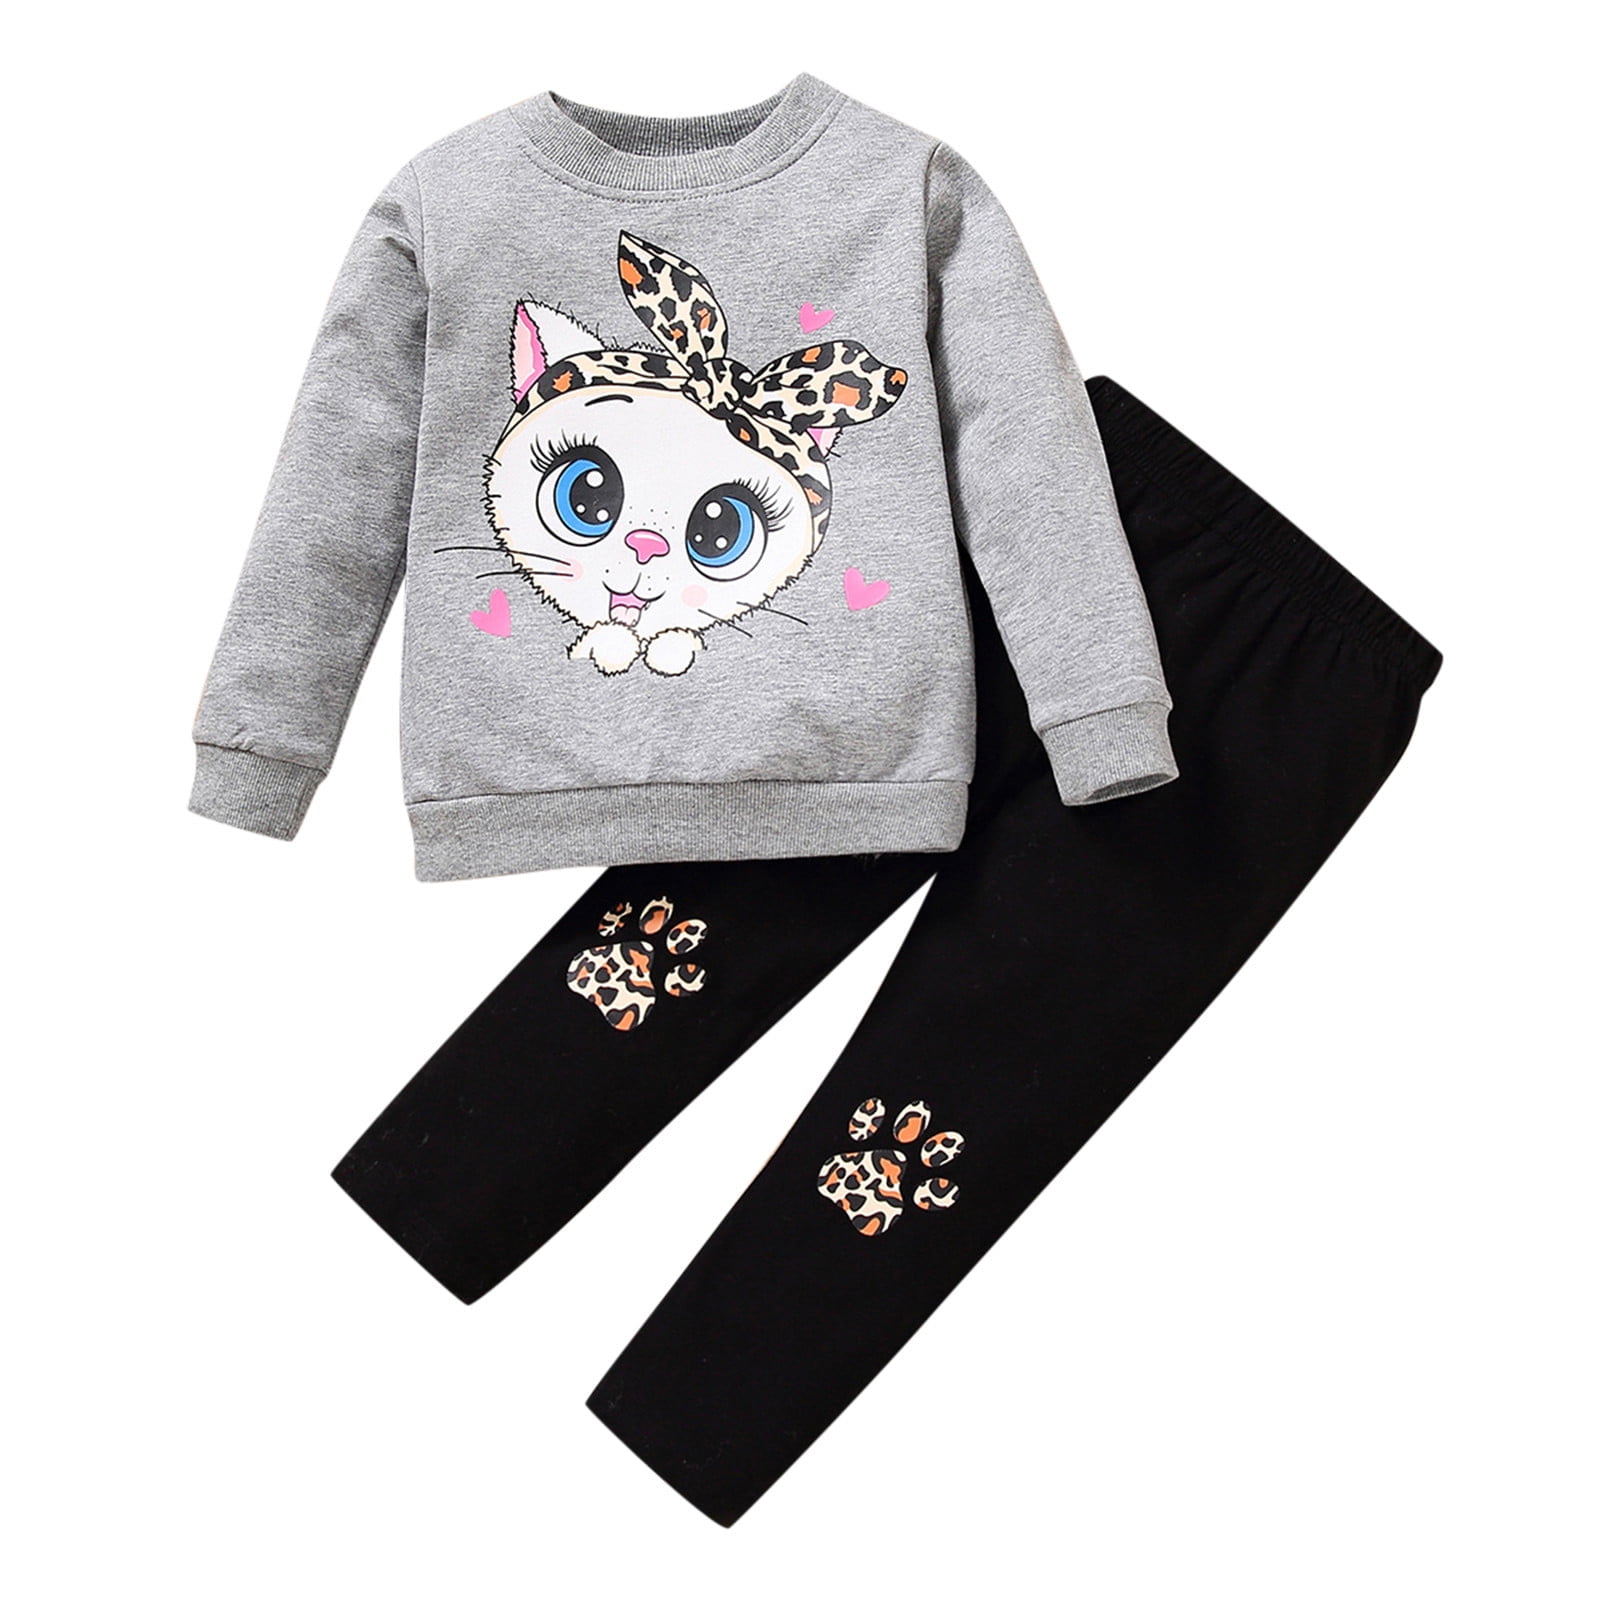 Durtebeua Toddler Baby Girl Outfit Sweatshirt and Leggings Outfit Set ...